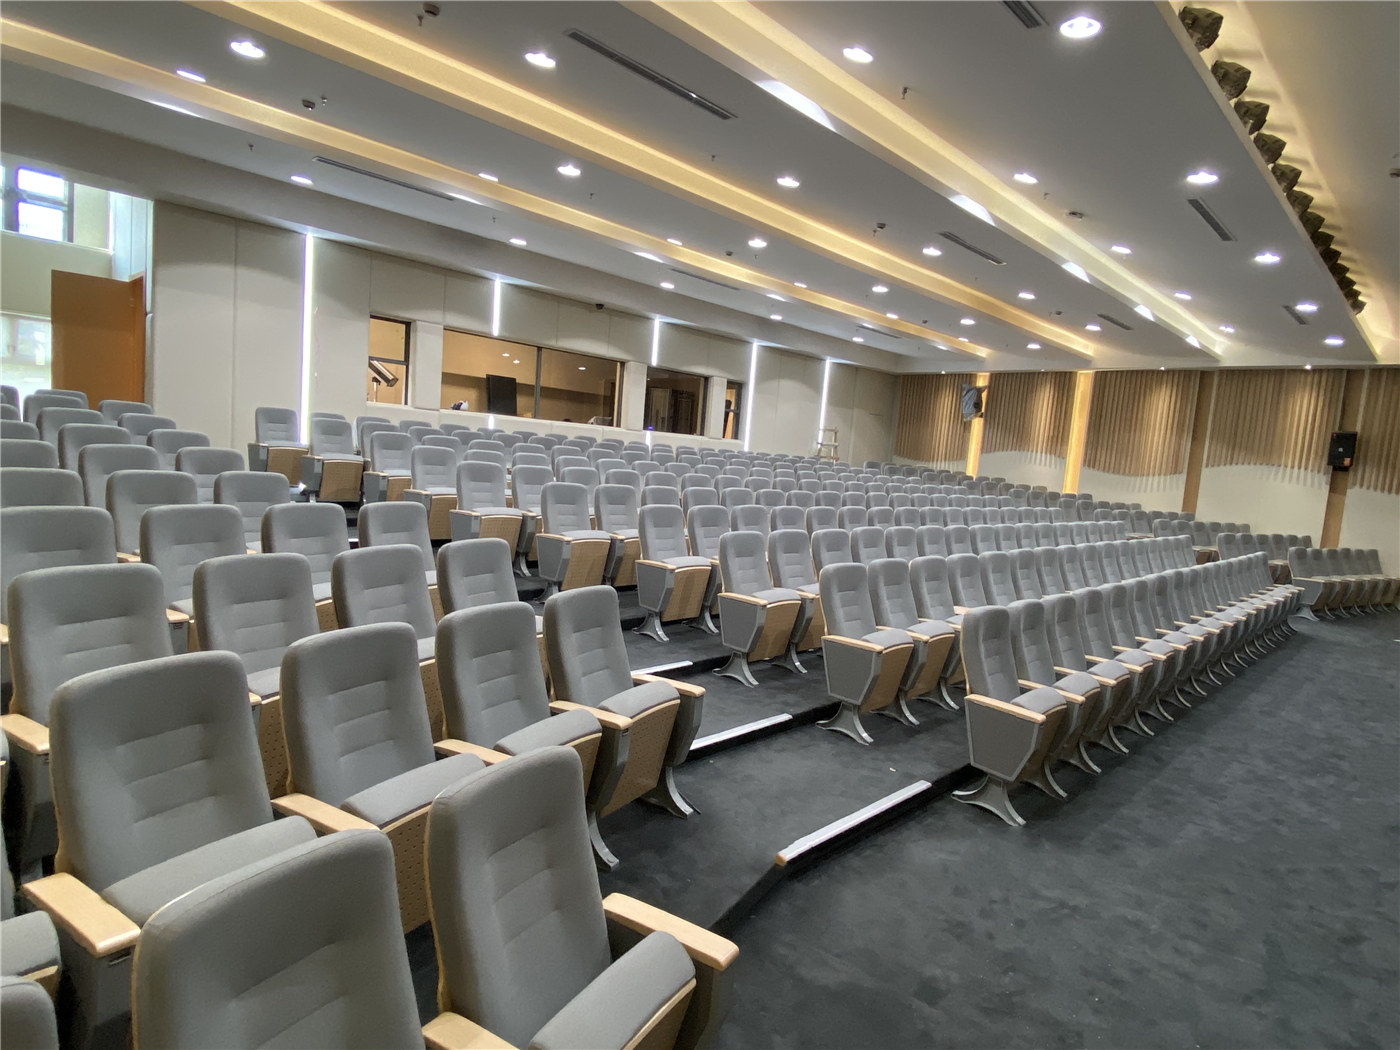 Experience Unparalleled Craftsmanship and Quality in Auditorium Seating from a Trusted Manufacturer110